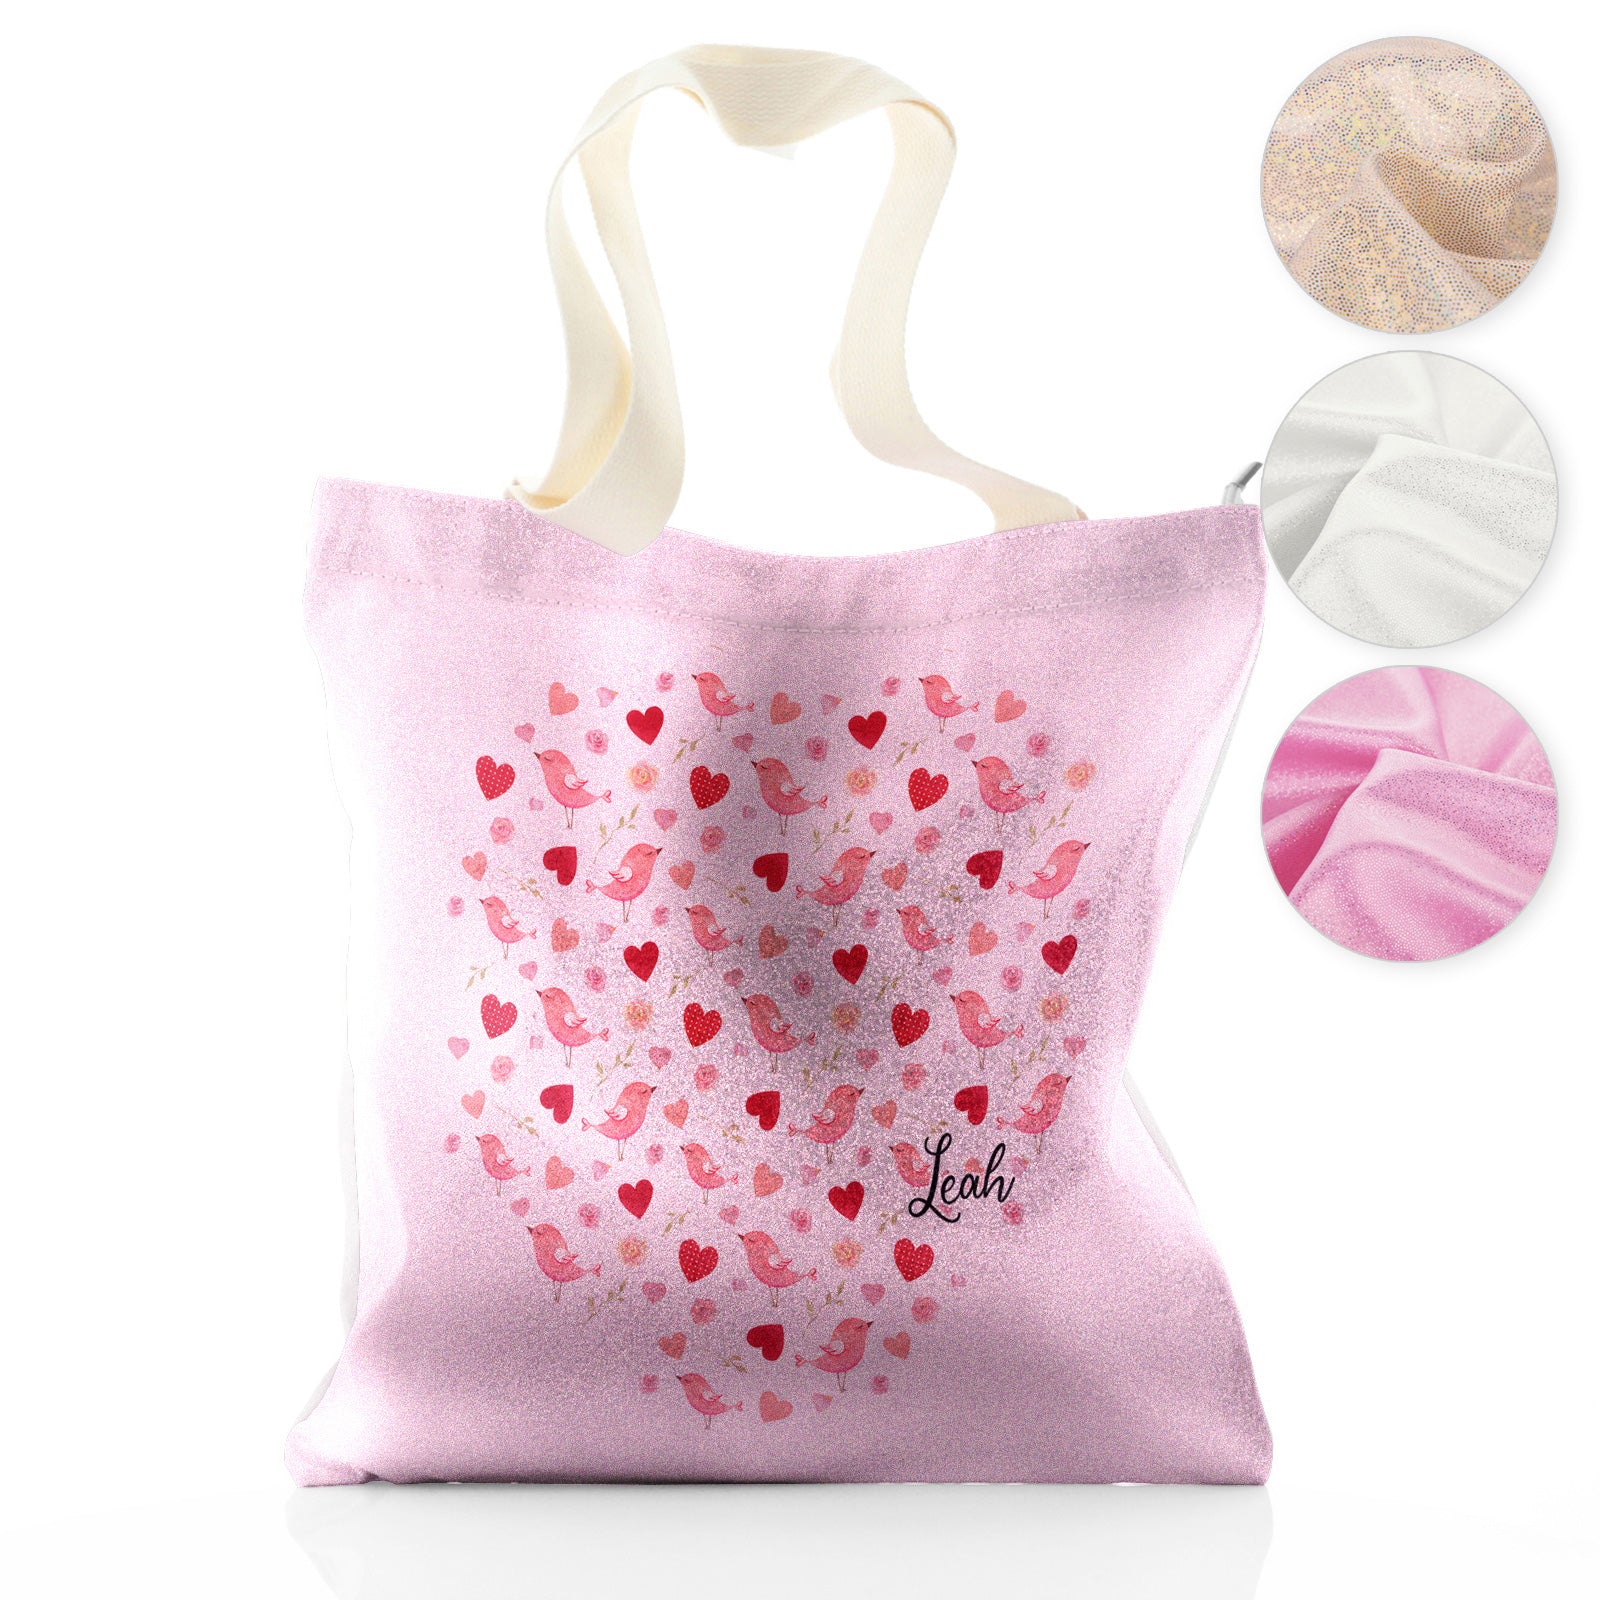 Personalised Glitter Tote Bag with Stylish Text and Love Heart Birds Print